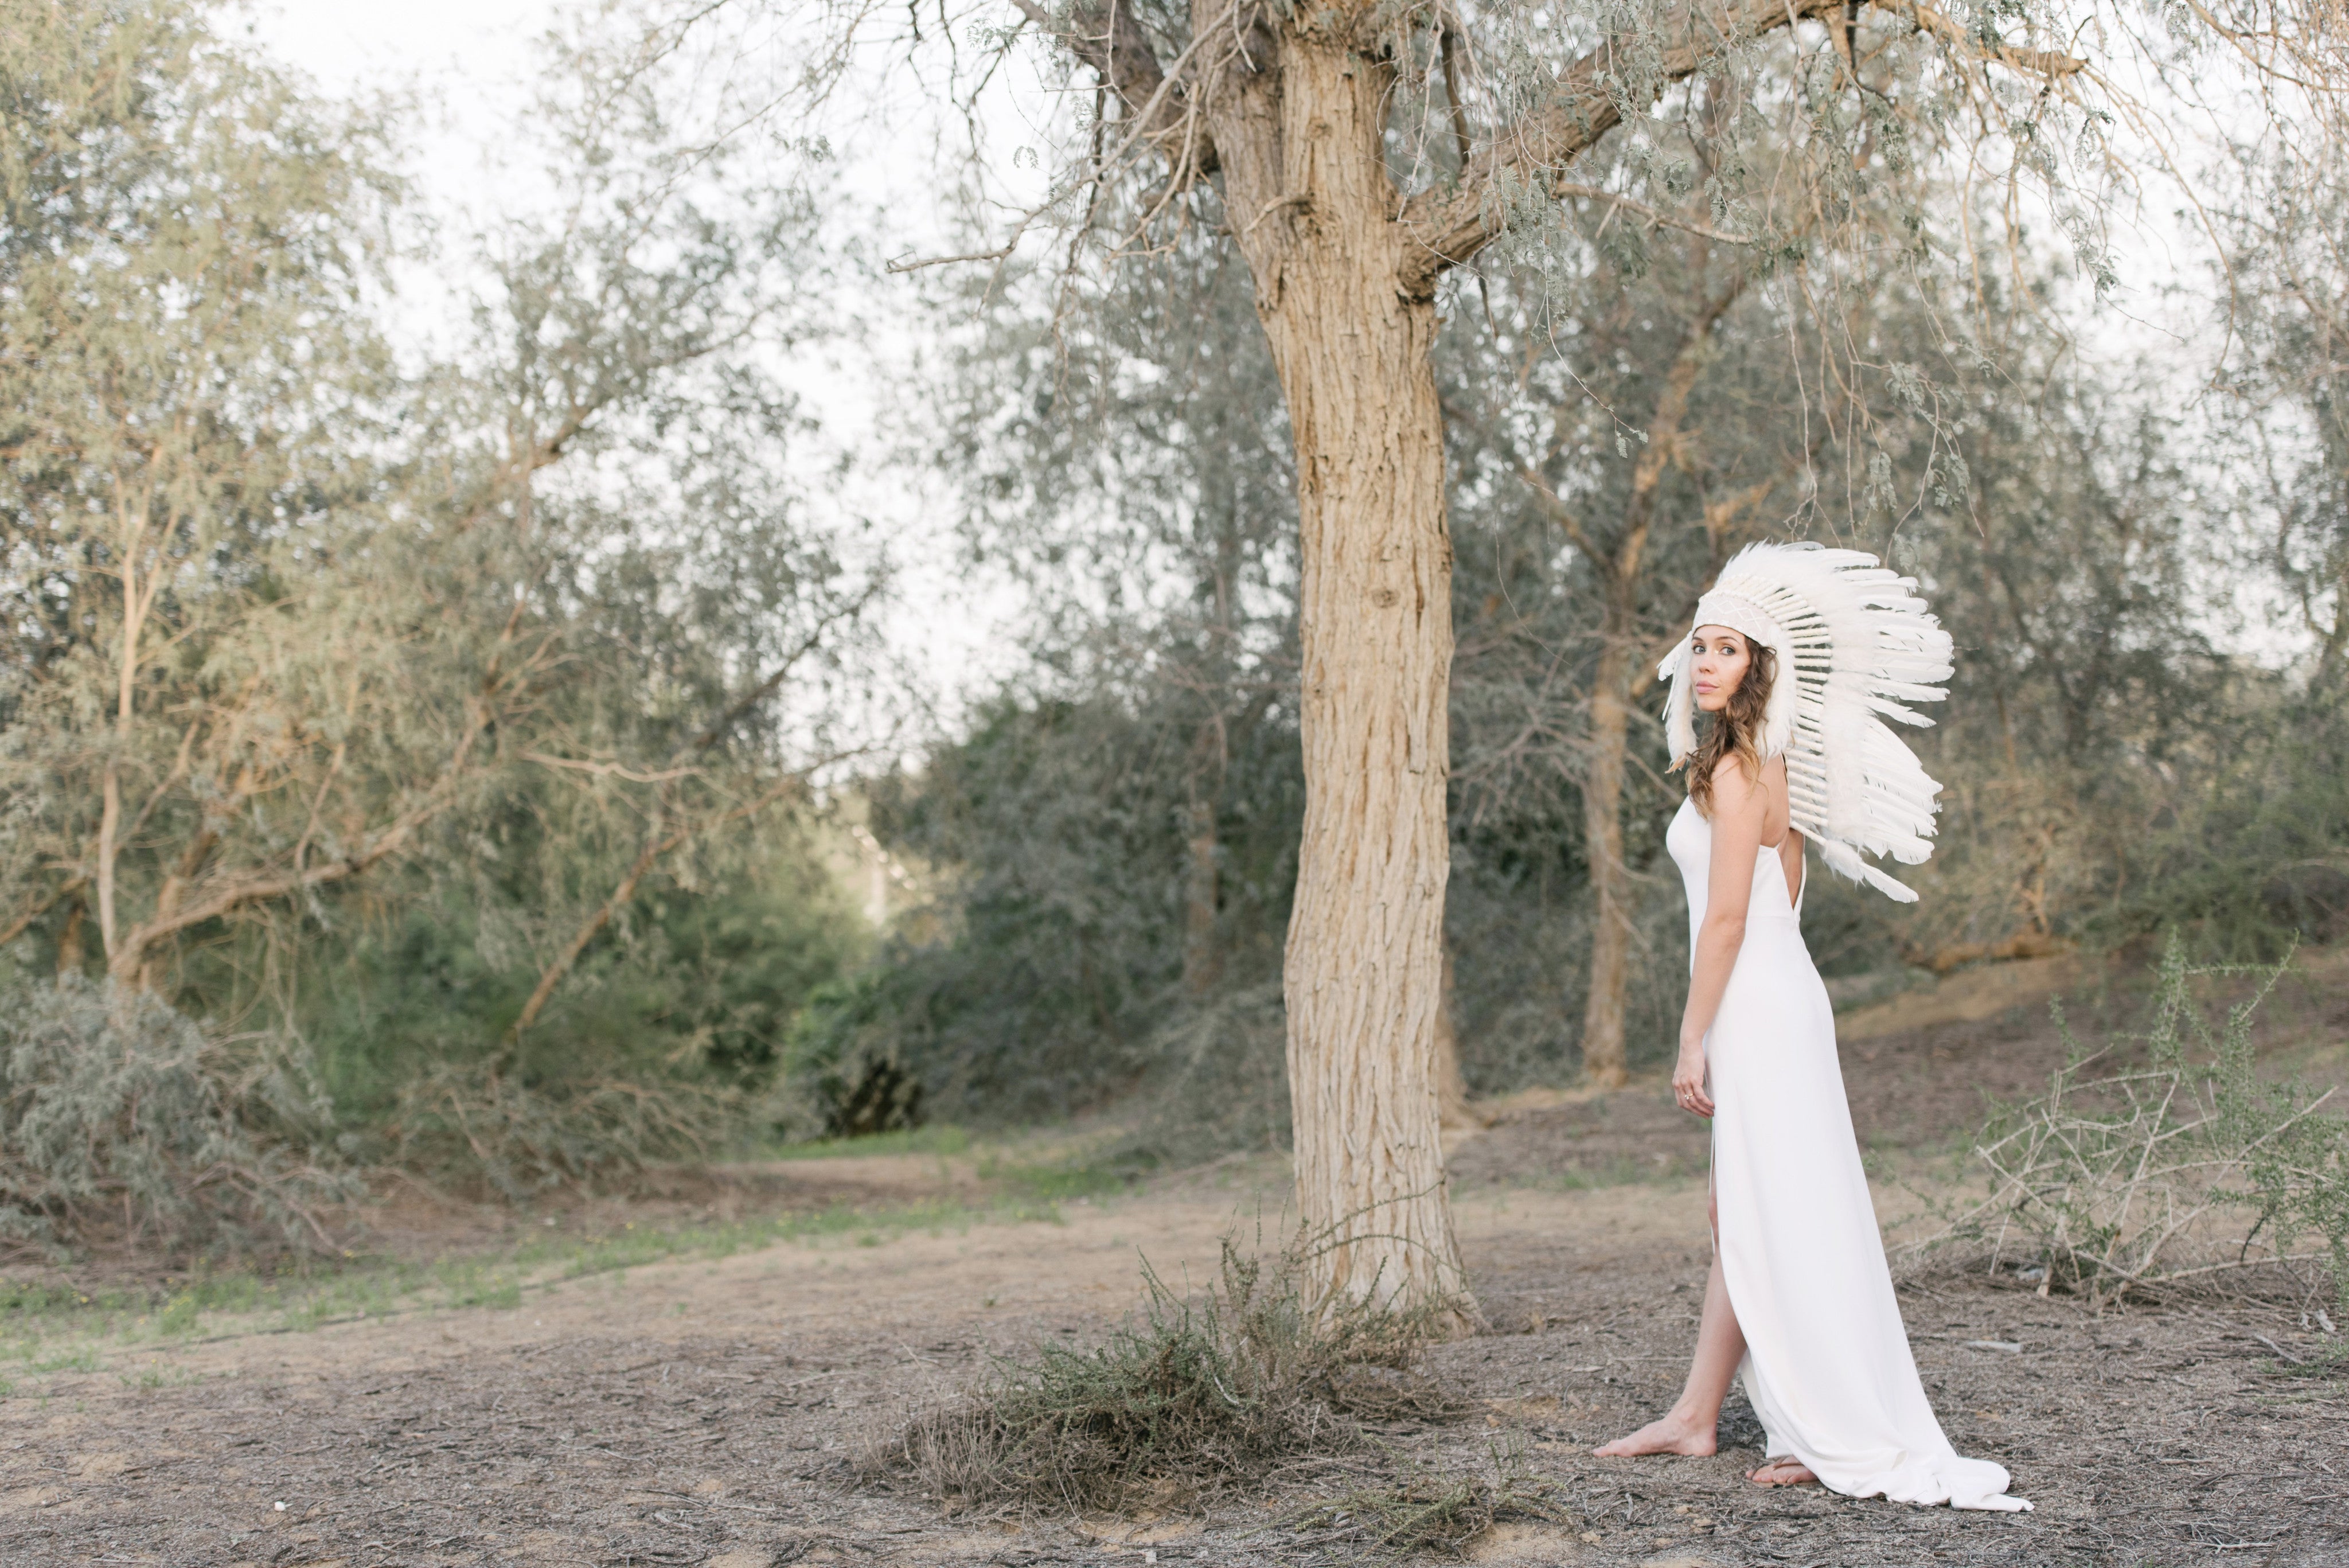 New Beginnings – A Free Spirited, Bohemian Shoot in Whimsical Woodland